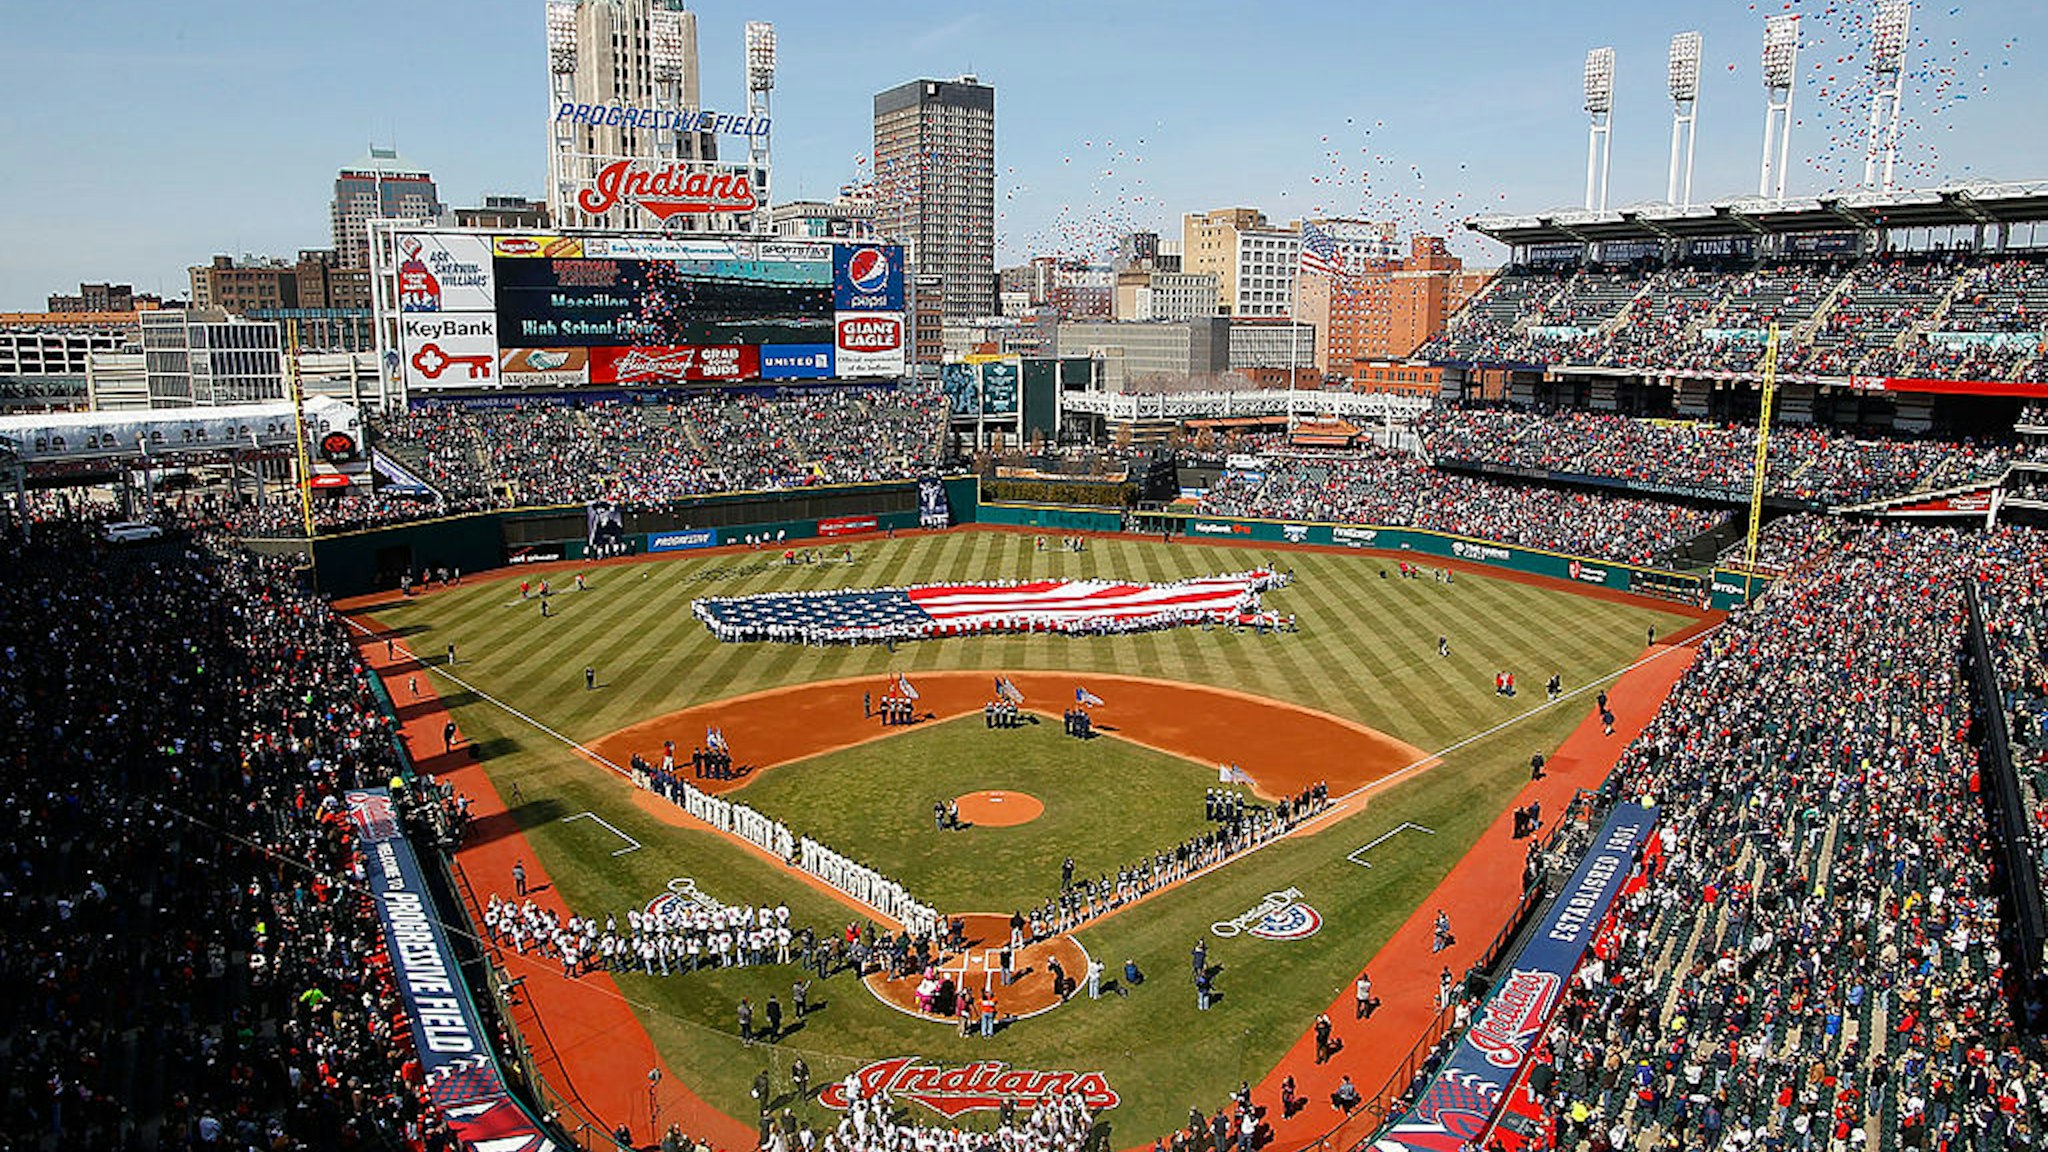 CLEVELAND - APRIL 01: General view of Progressive Field stadium prior to the the Opening Day game between the Cleveland Indians and the Chicago White Sox on April 1, 2011 at Progressive Field in Cleveland, Ohio. (Photo by Jared Wickerham/Getty Images)